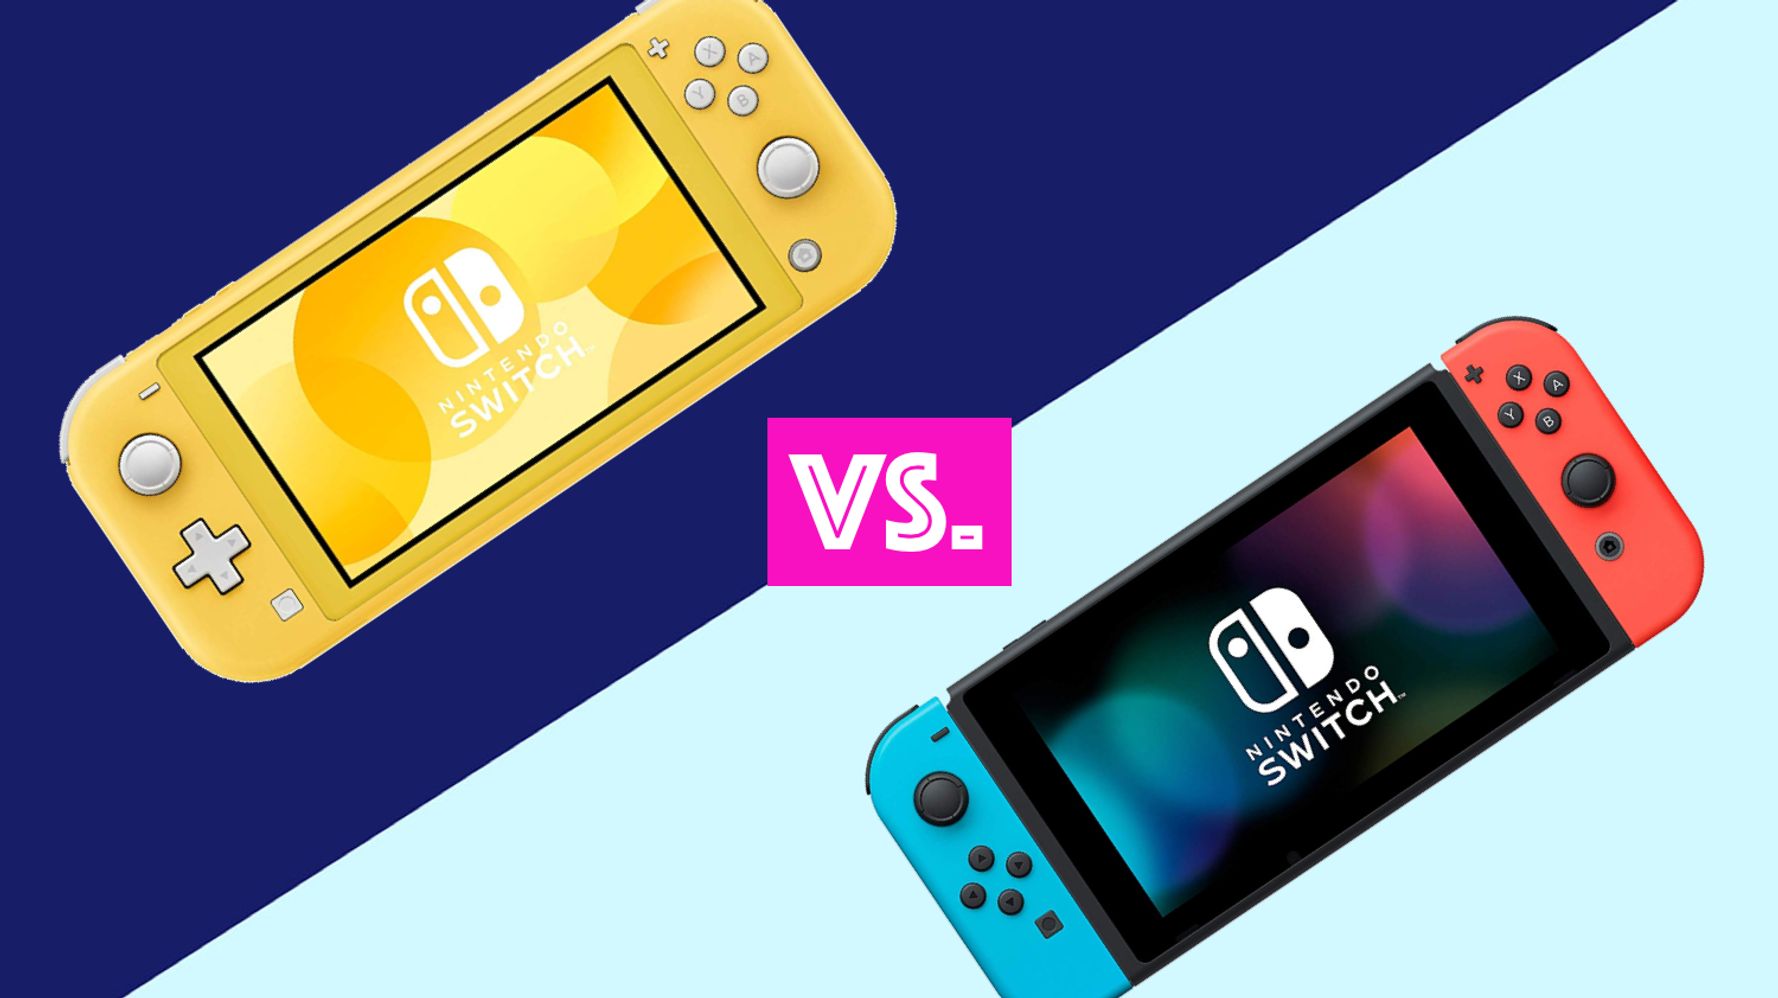 Nintendo Switch vs Lite, Which should you buy?